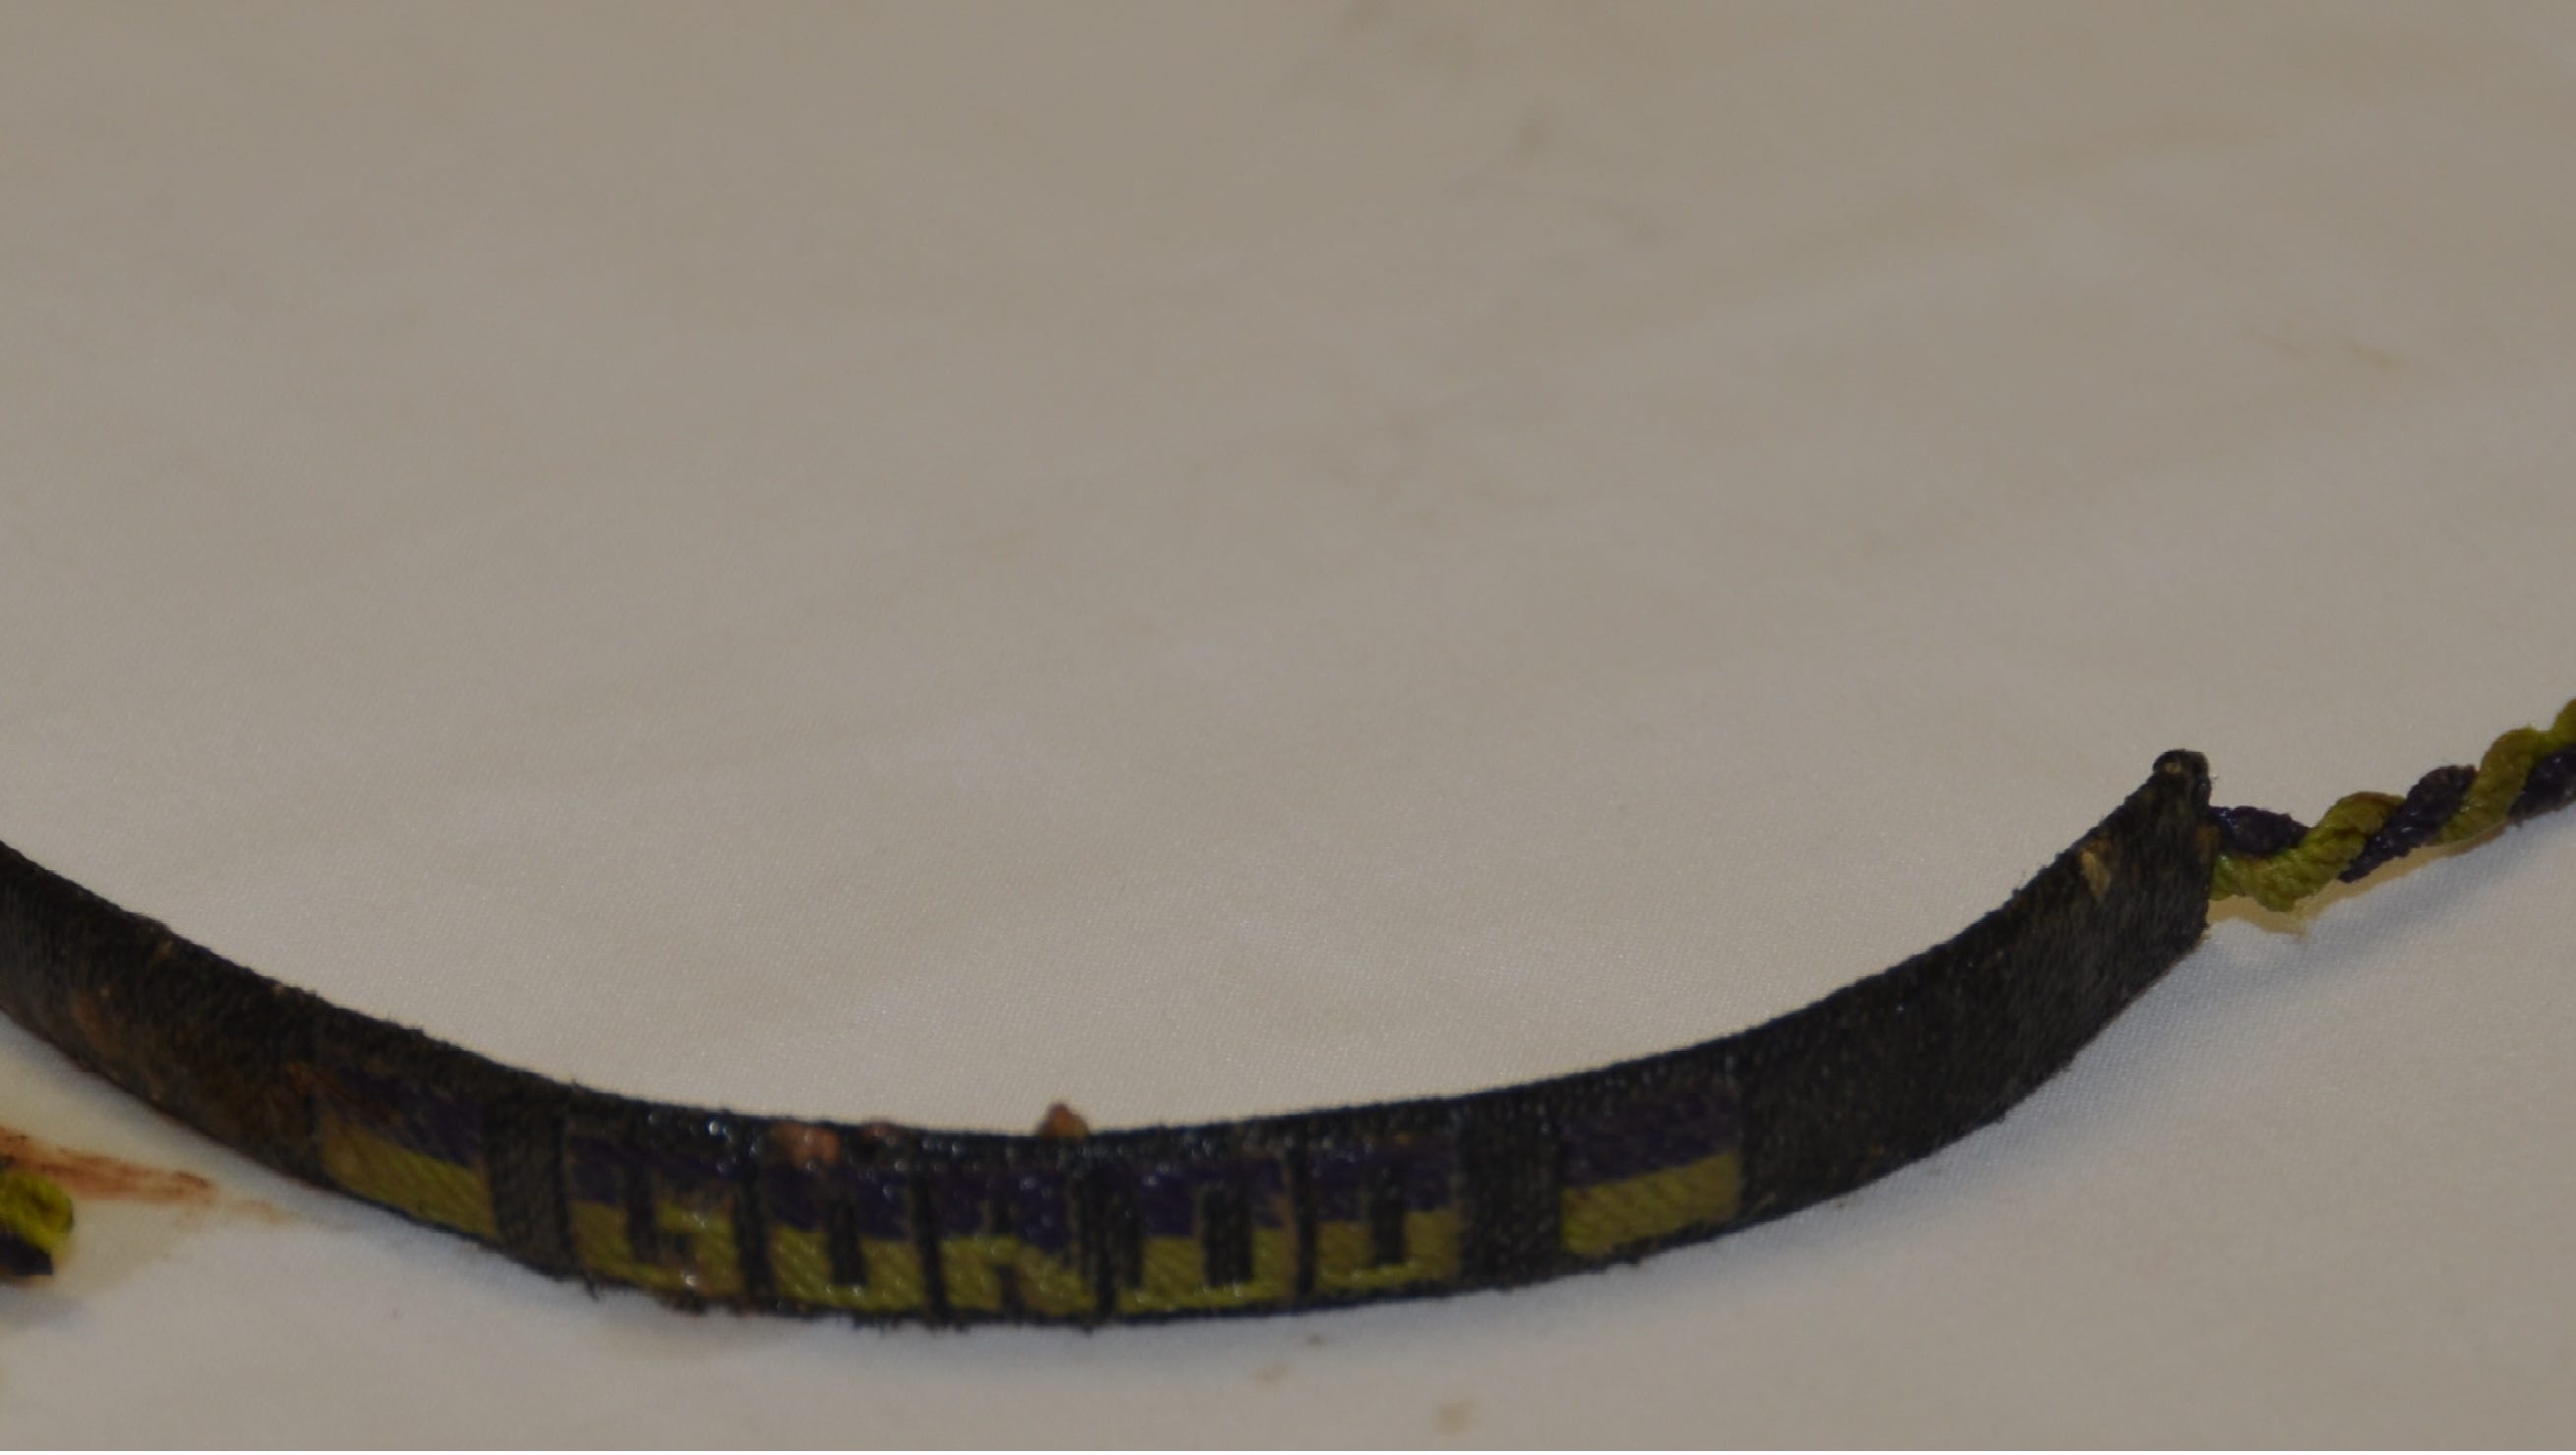 A woven bracelet that reads “Gordo” found with the body of a Latino man located in the All-American Canal on July 28, 2015. Photo from John Doe Case #15-130.